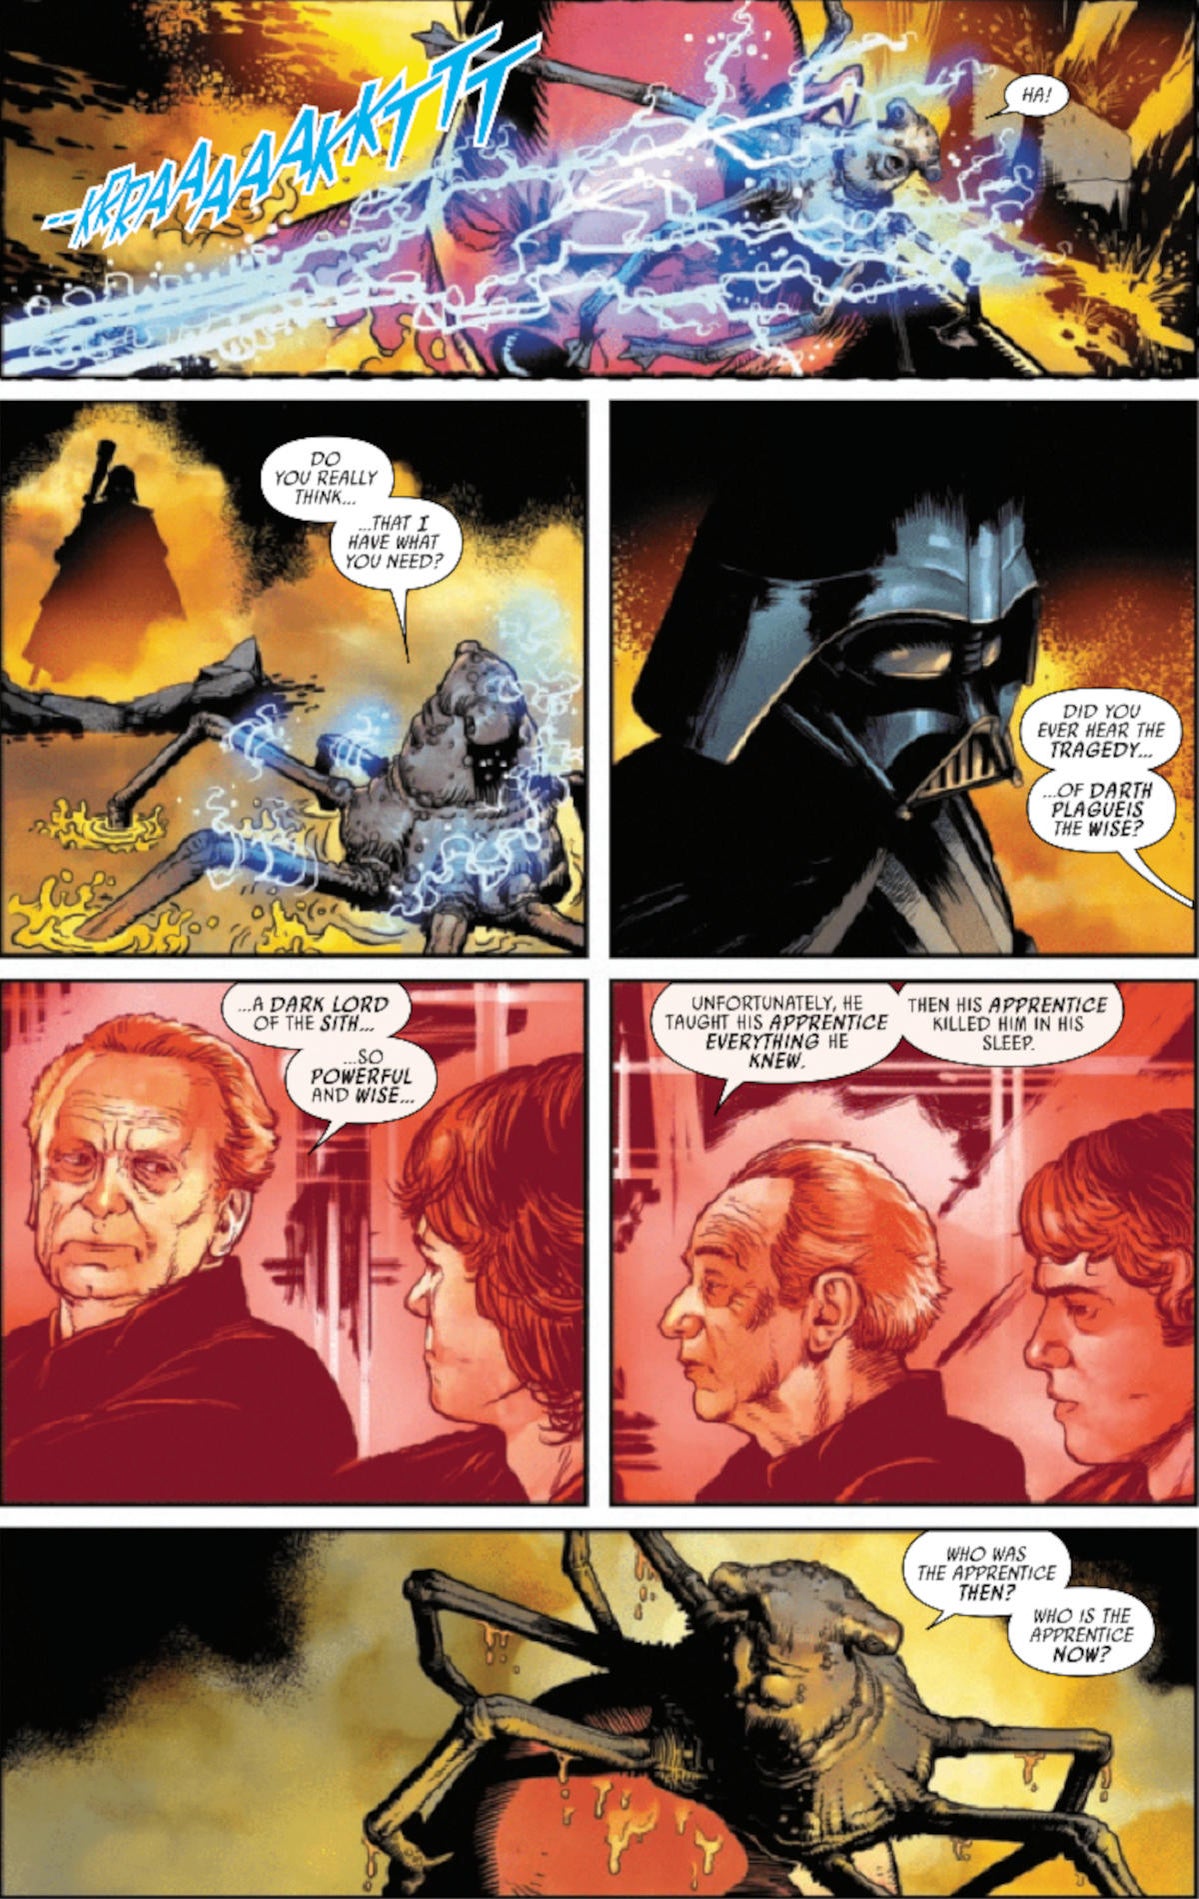 darth-vader-inspired-by-plagueis-to-kill-palpatine-sidious-comic-38.jpg